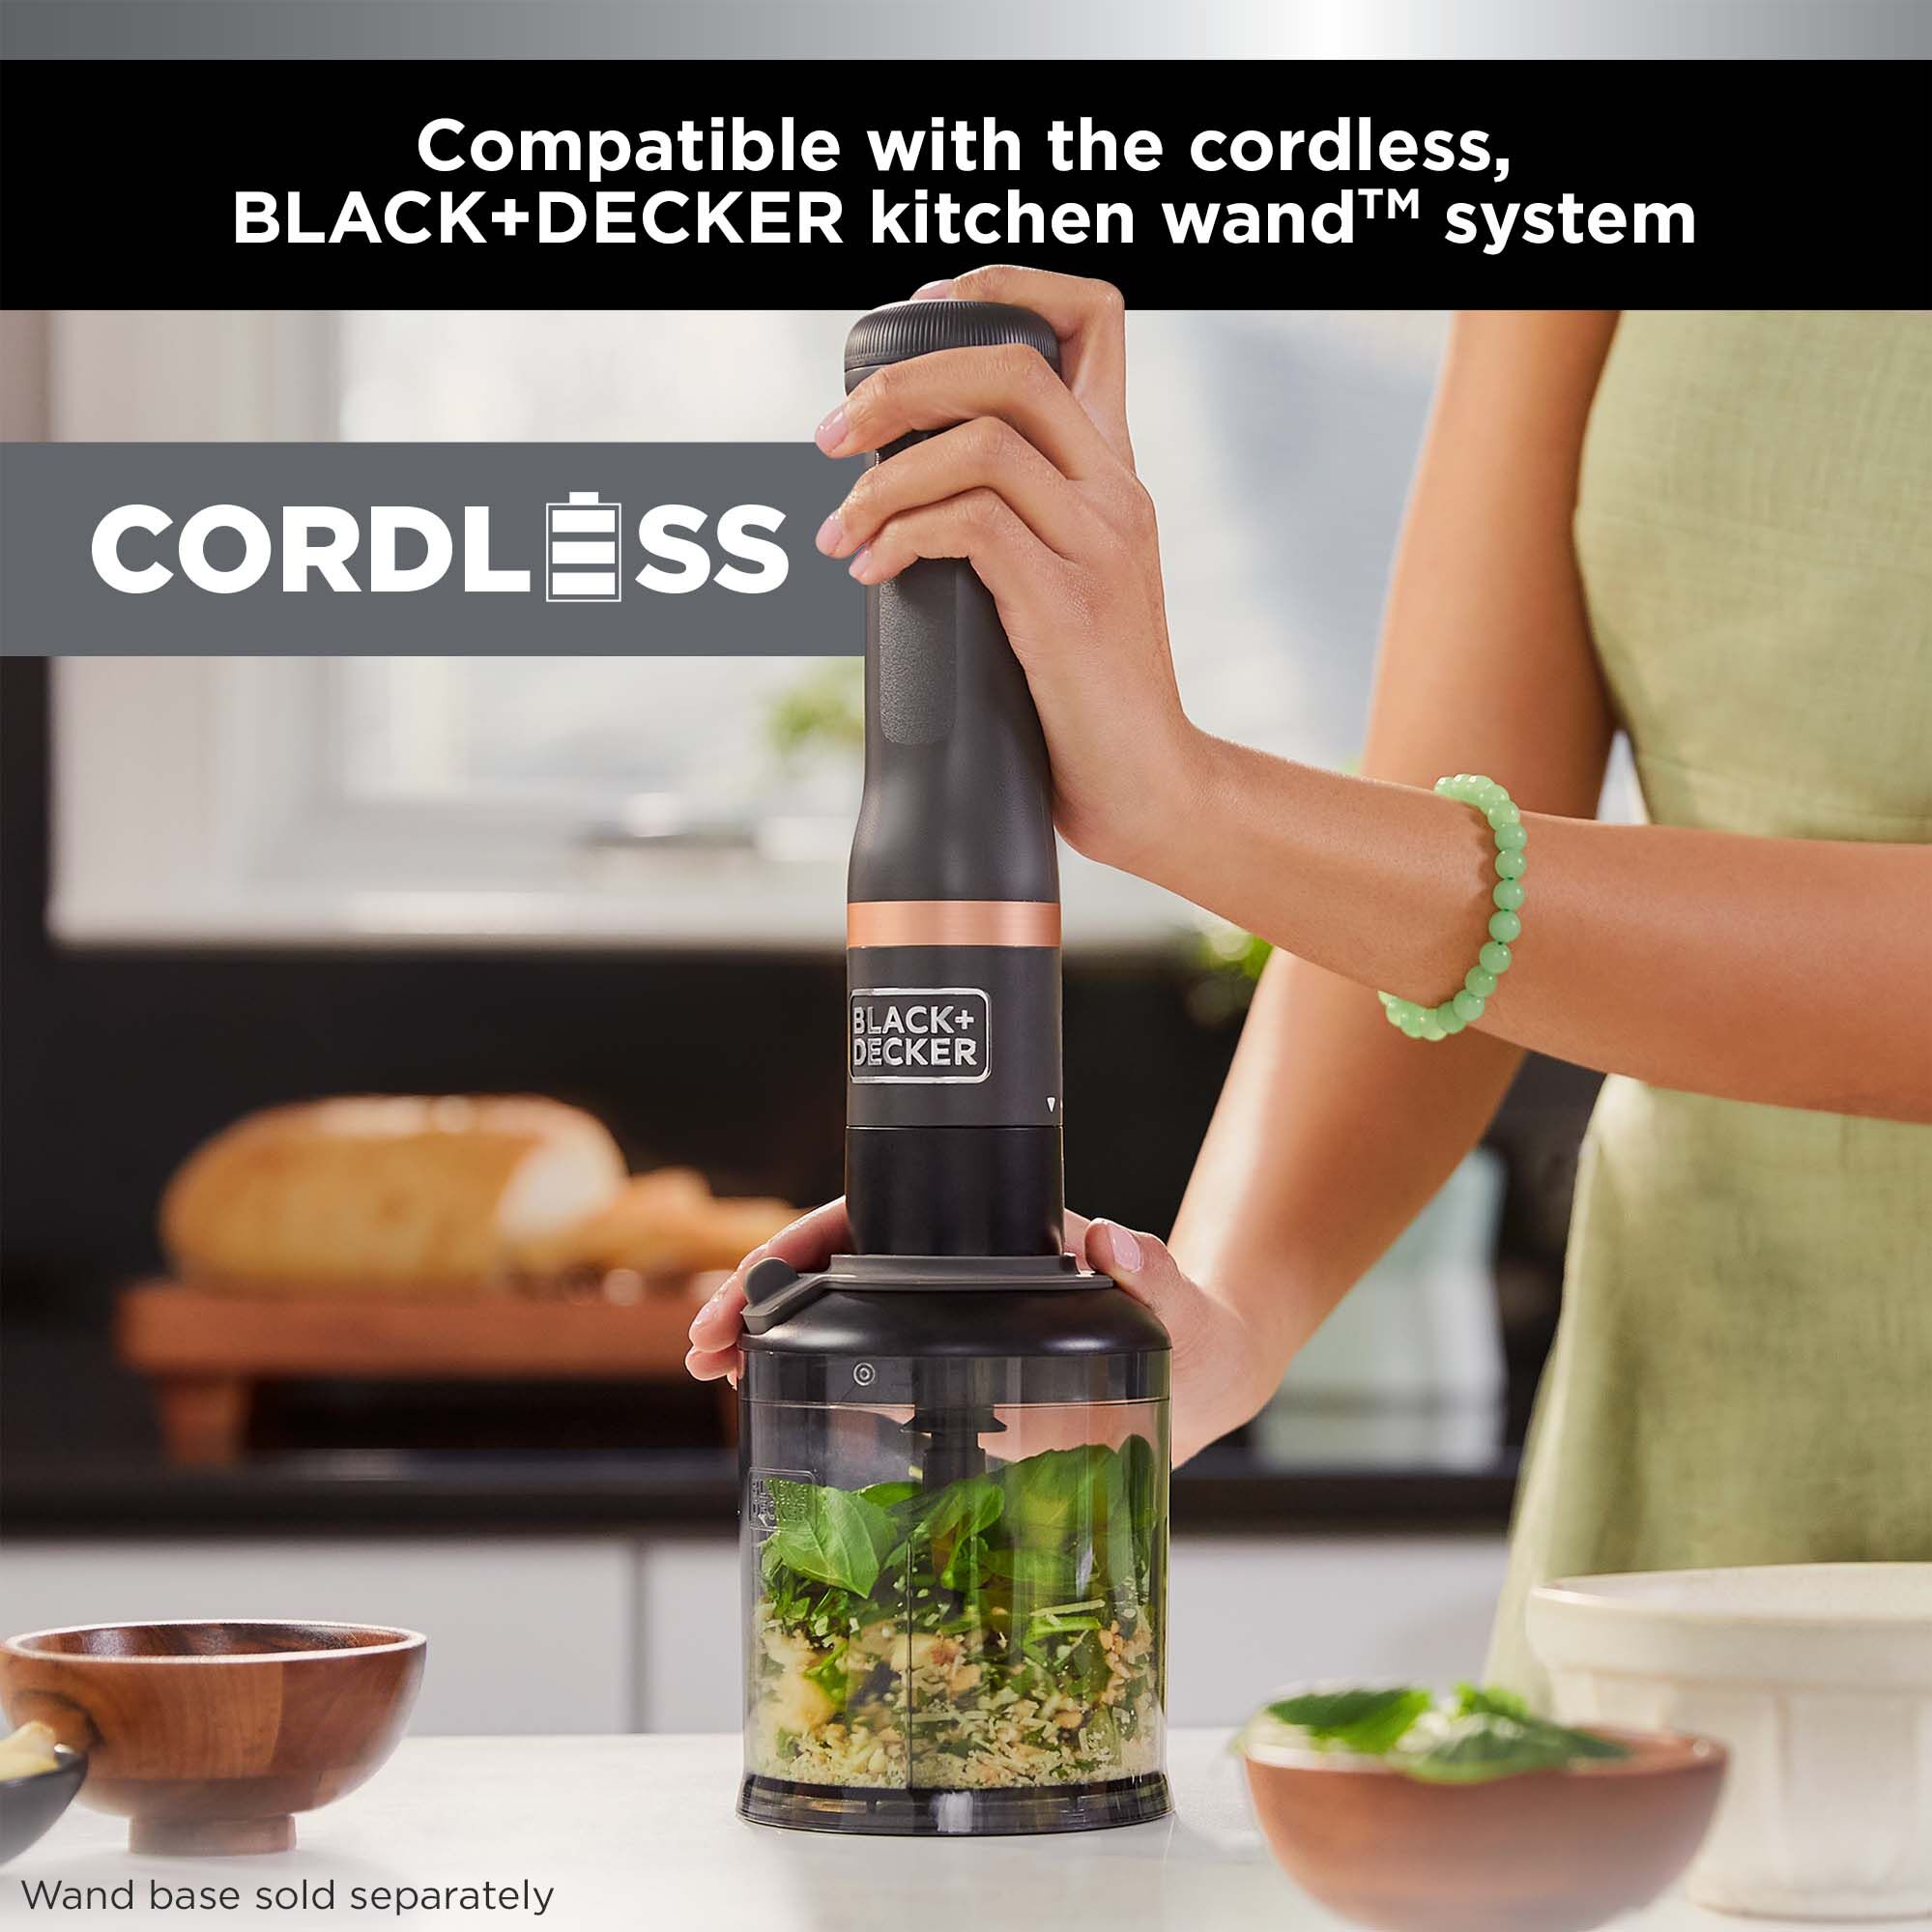 Talent using the BLACK+DECKER kitchen wand™ food chopper attachment  with the grey wand base to show it is cordless